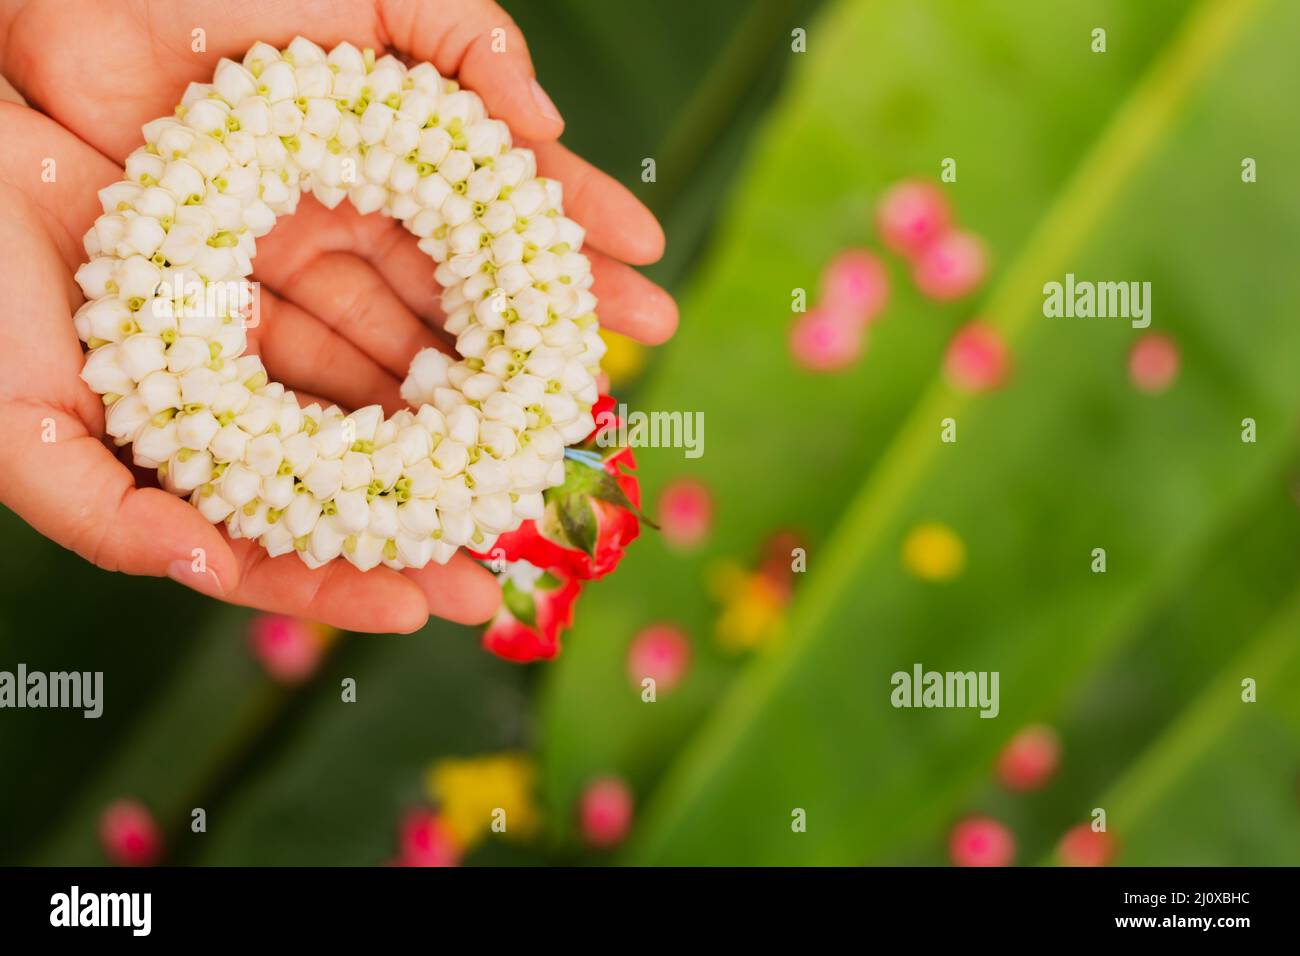 Mother's hand holding a jasmine garland during Songkran Festival Stock Photo